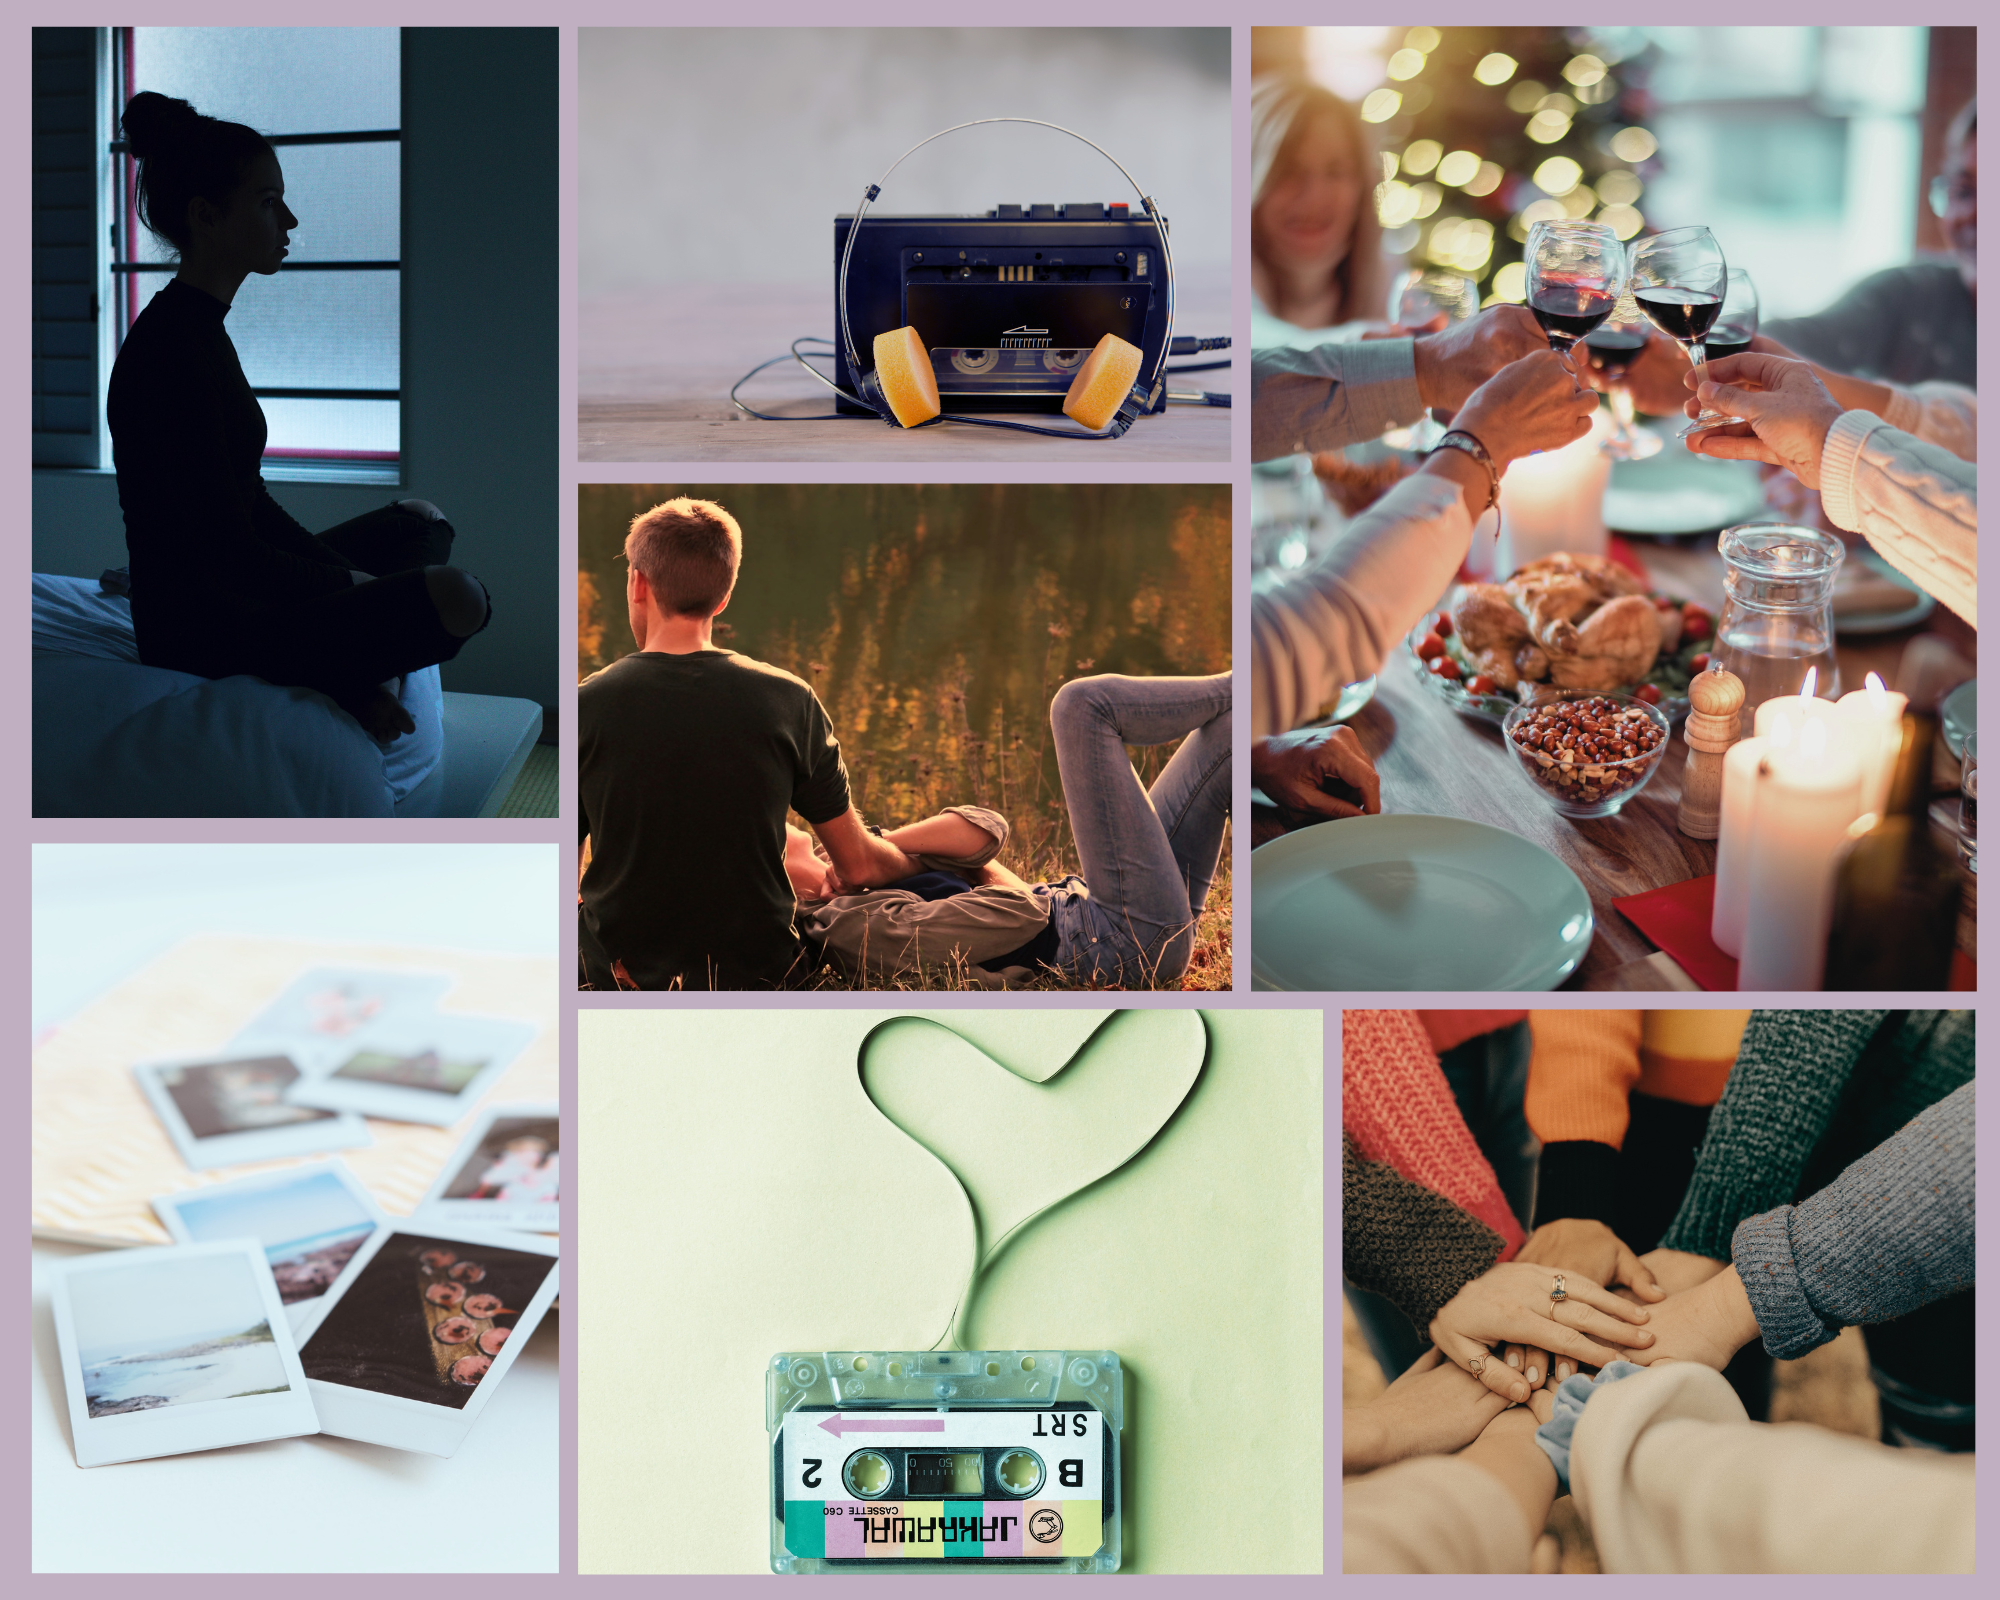 Moodboard clockwise from top left: silhouette of woman sitting on bed in darkened room; Sony Walkman with orange sponge headphones; hands clinking wineglasses over table; hands on top of each other in circle; cassette tape with the tape in a heart shape; scattered Polaroid pictures; woman lying head on man’s lap in field